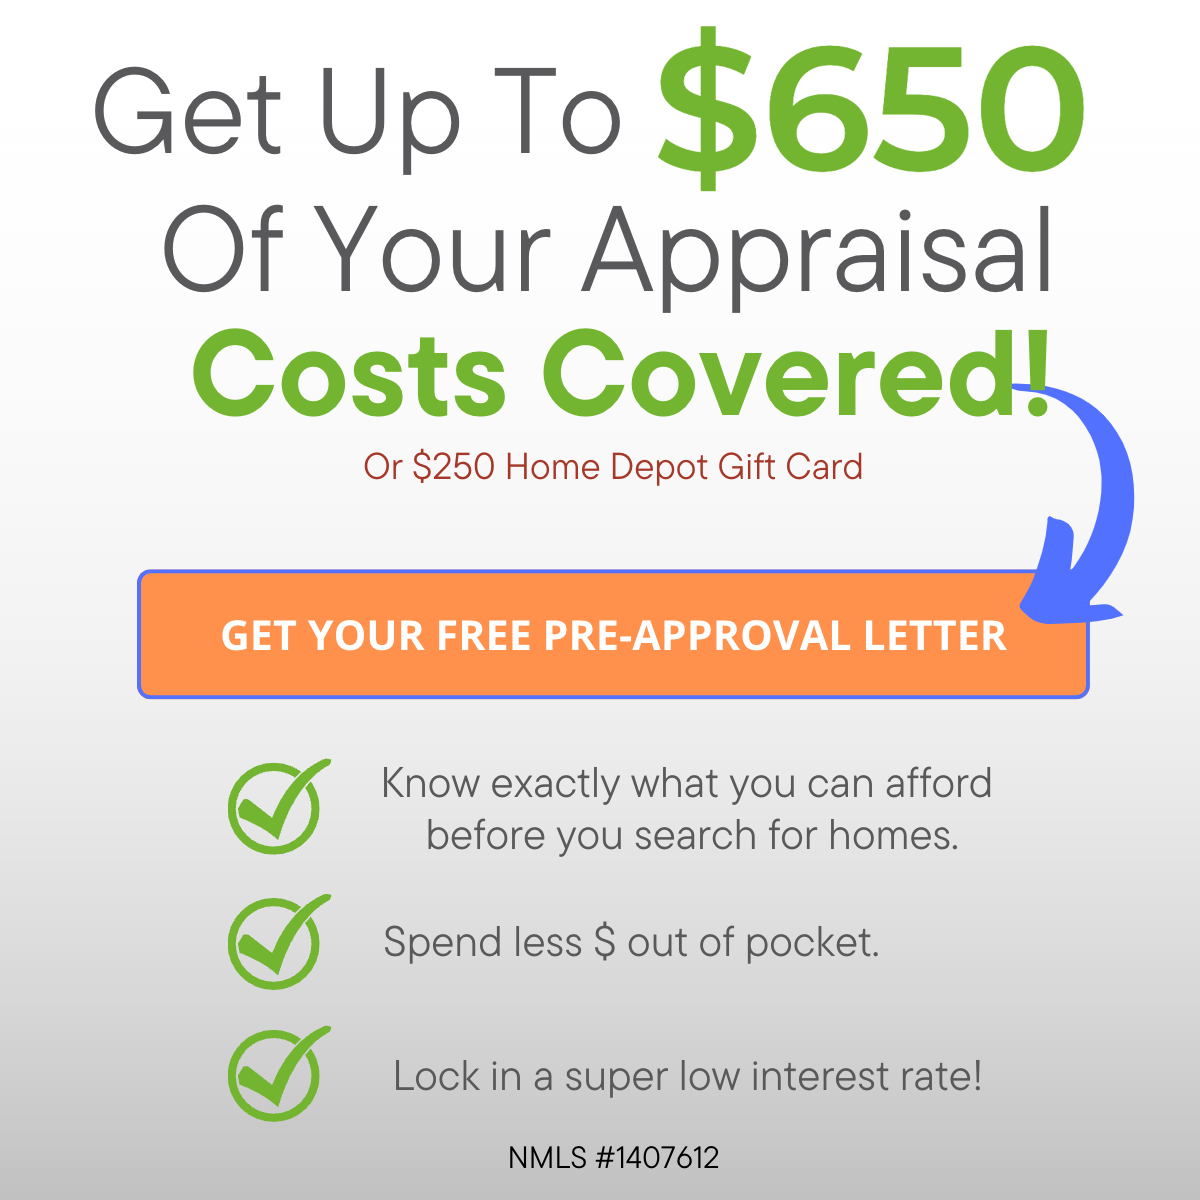 GET YOUR FREE PRE-APPROVAL LETTER AND APPRAISAL COSTS COVERED! https://bthornton-pre-approval-letter-site-10041.itclix.com